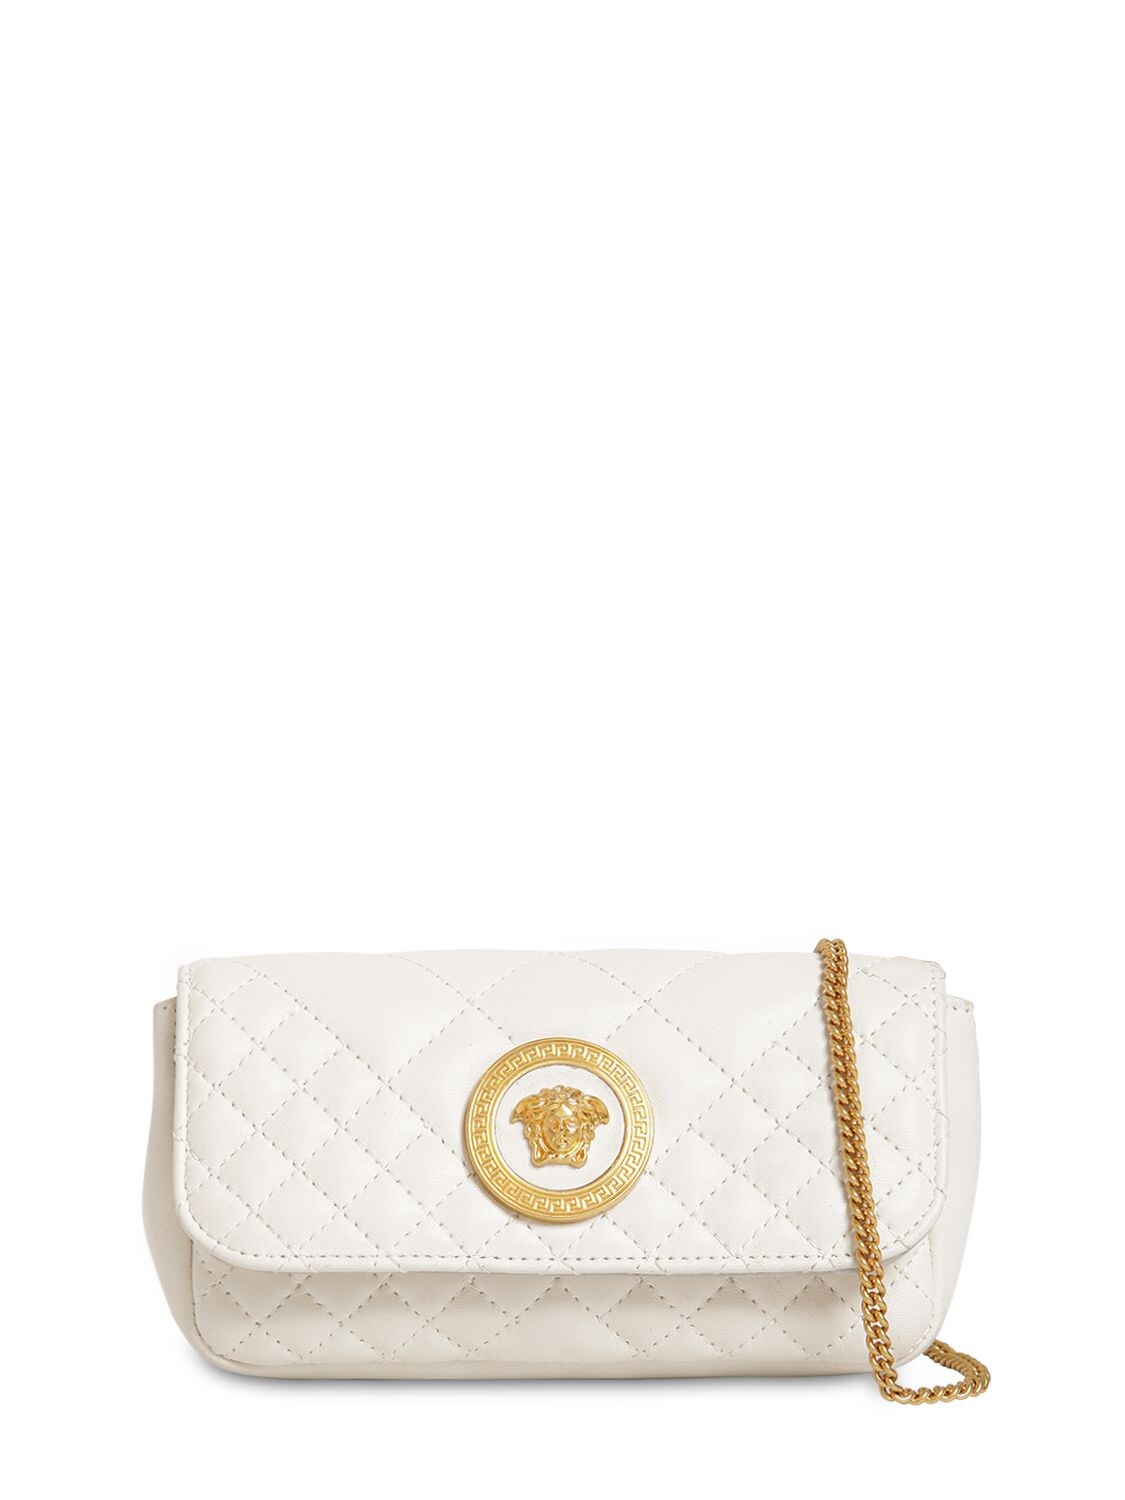 VERSACE MINI ICON QUILTED LEATHER SHOULDER BAG,70IA87013-SZA2T1Q1